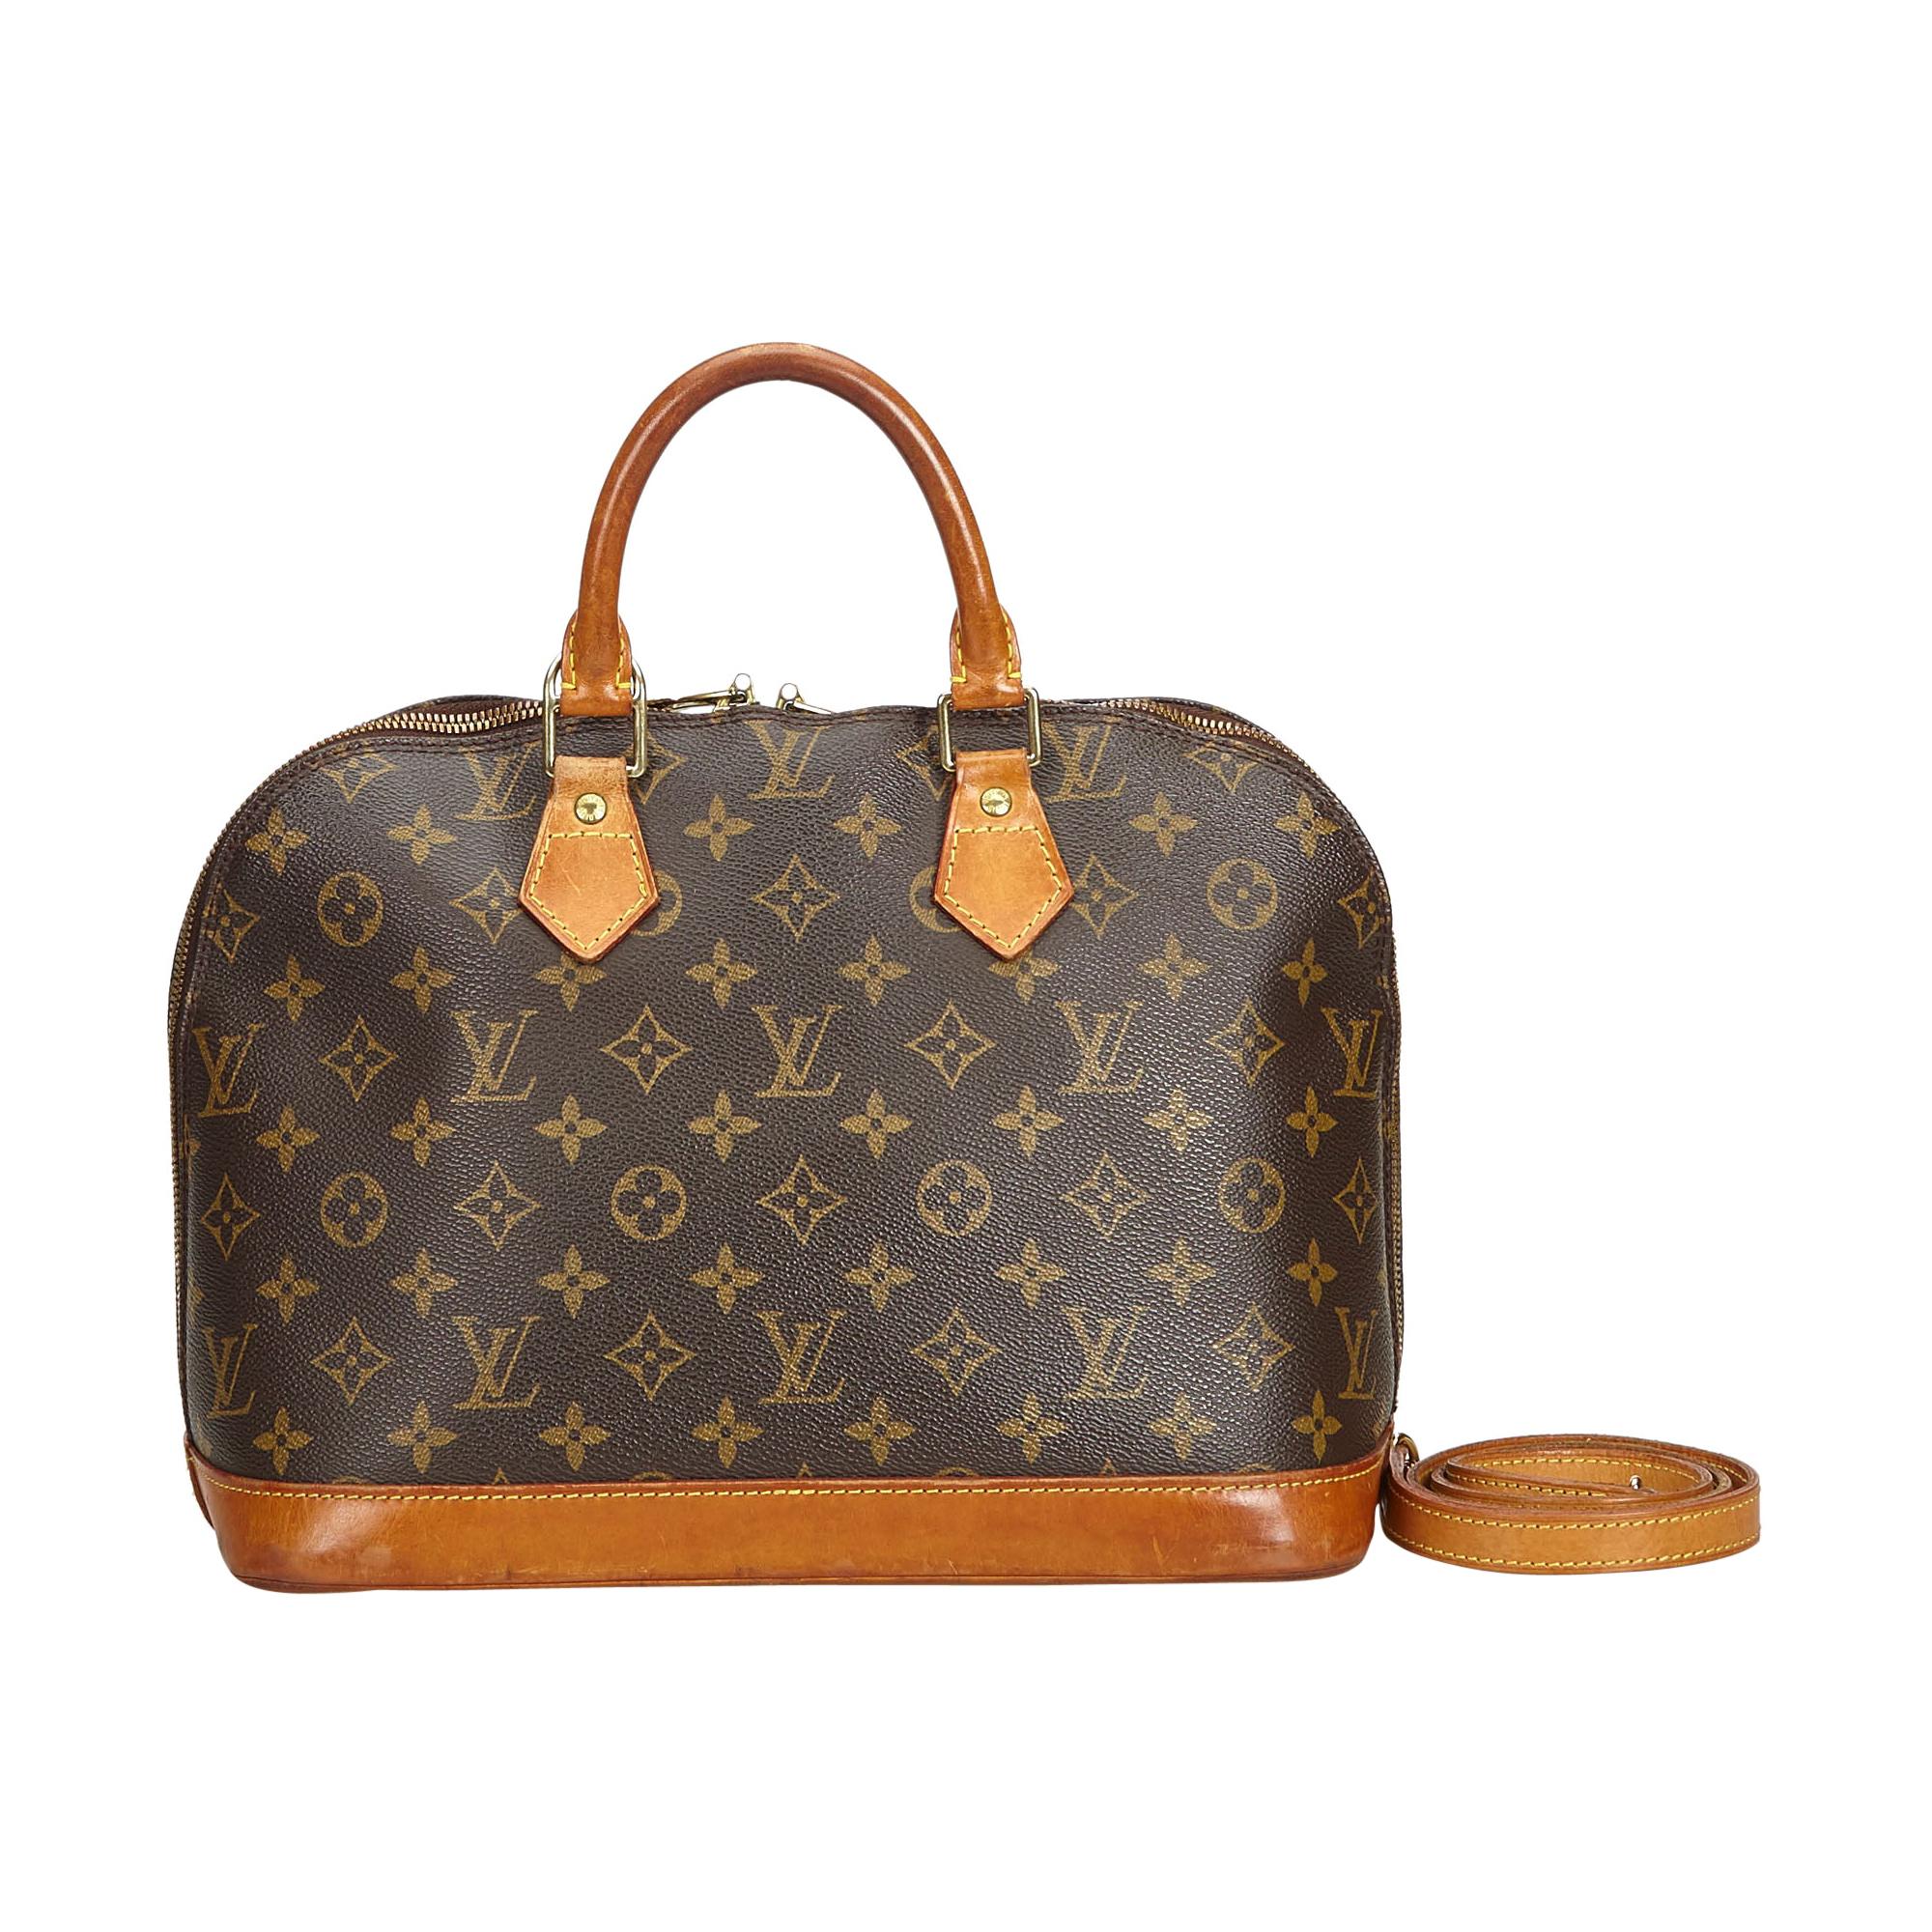 Coco Chanel's bag back then. Louis Vuitton.Alma PM. Runway piece. Rare. Out  of stock worldwide.